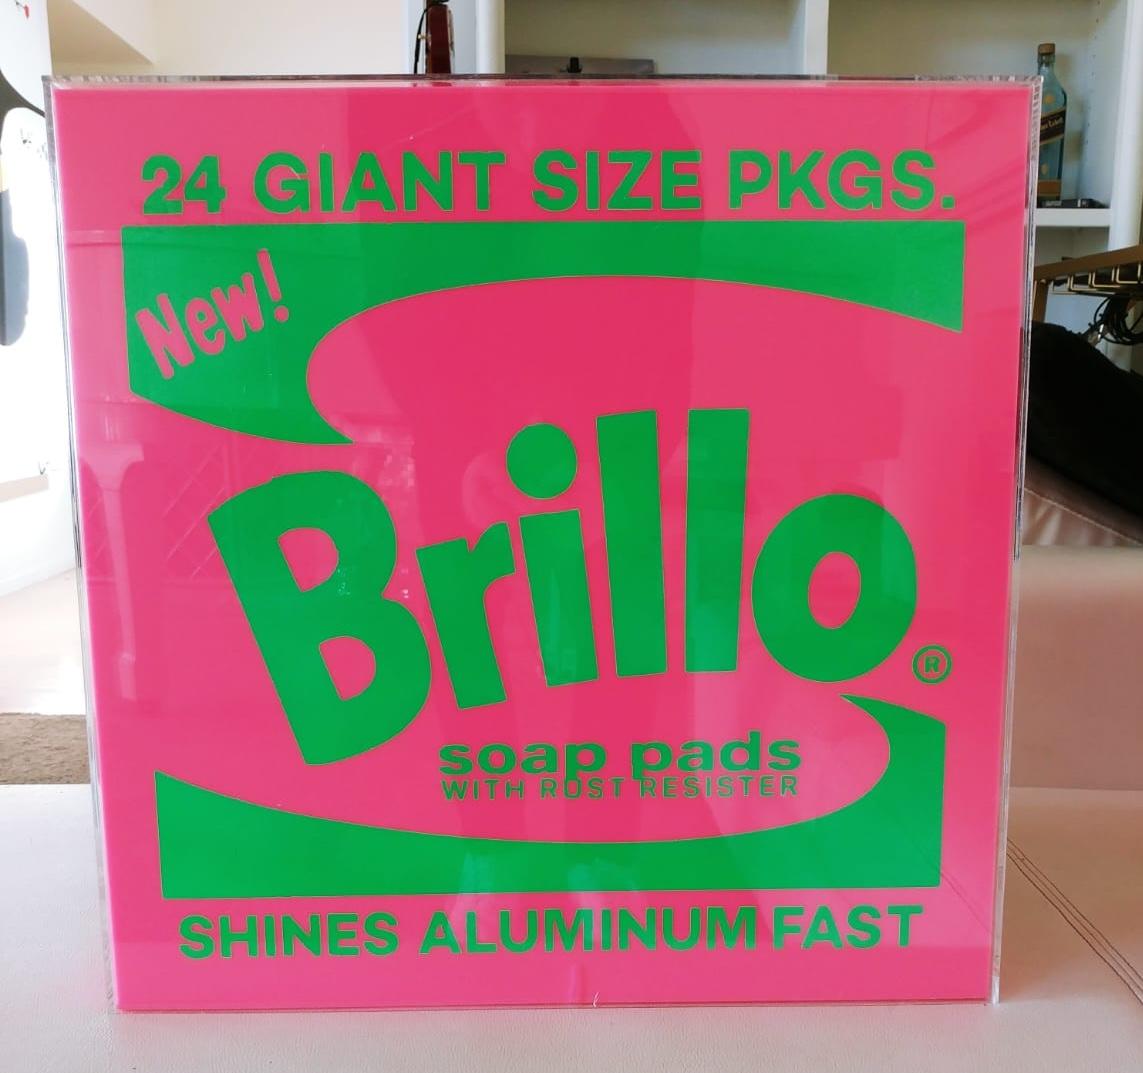 "Brillo Box Pink" Sculpture 17" x 17.5" x 14" inch Edition 1/1 by Kii Arens

ABOUT
One of the most credible and influential in Los Angeles - the award winning Kii Arens, is a critical driver in the creation of modern pop culture. A contemporary